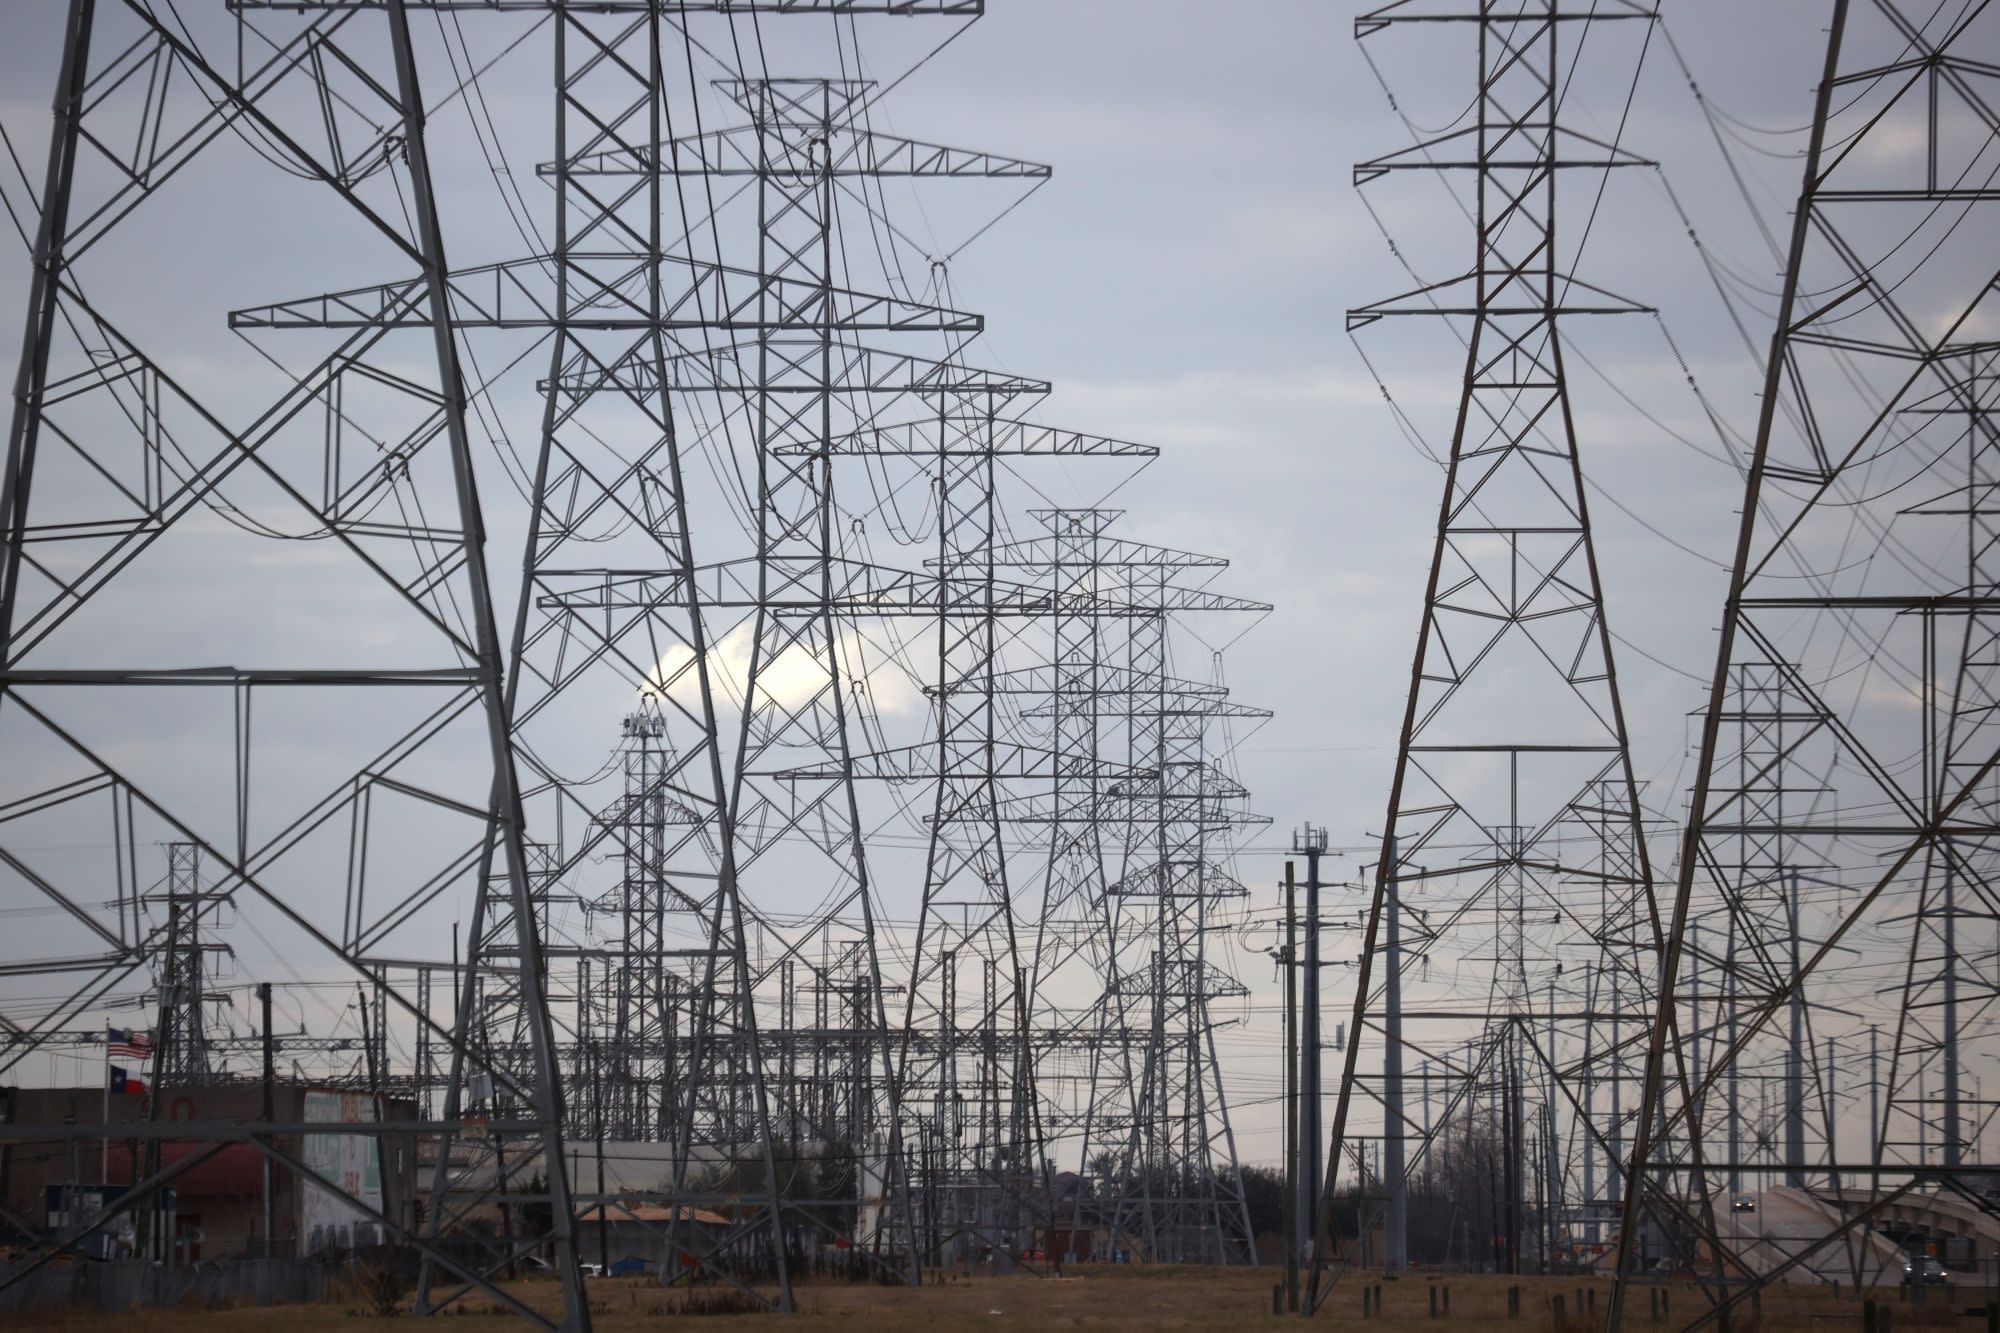 Days before Blackouts Alerted One Texas Power Giant